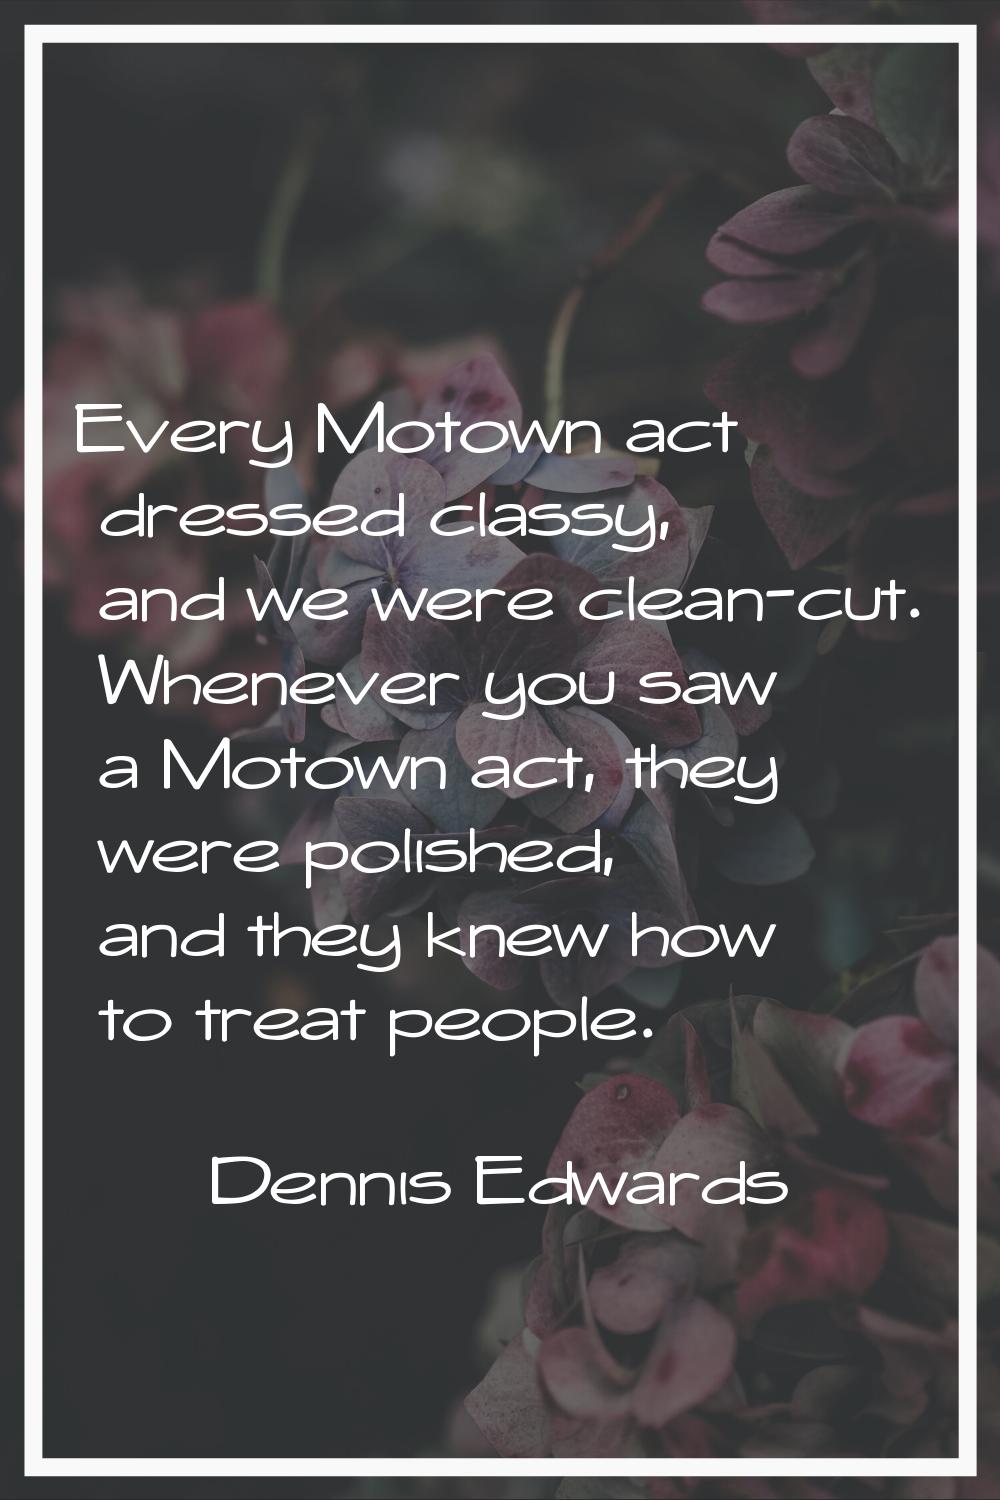 Every Motown act dressed classy, and we were clean-cut. Whenever you saw a Motown act, they were po